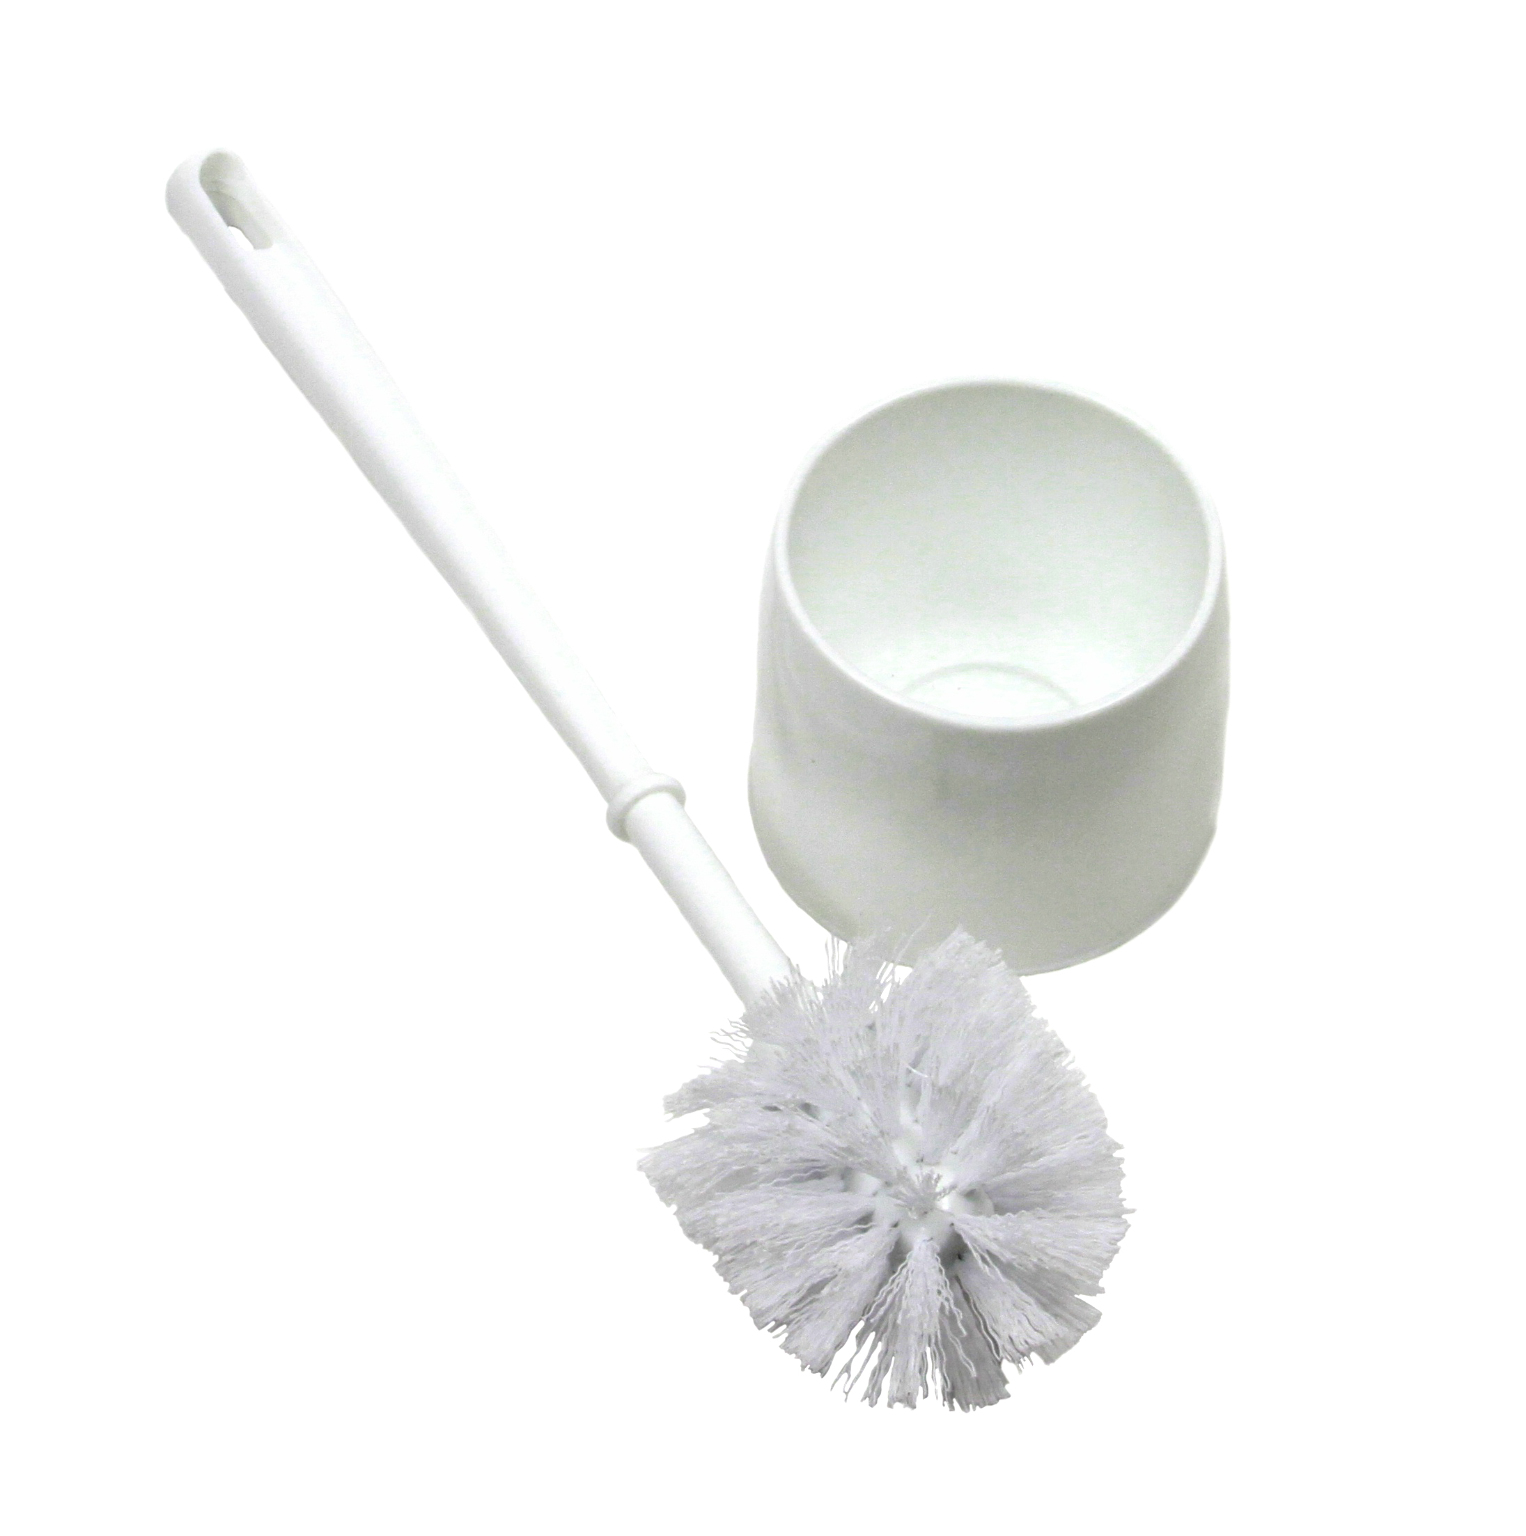 Toilet Bowl Brush with Corner Caddy - Cleaner Solutions